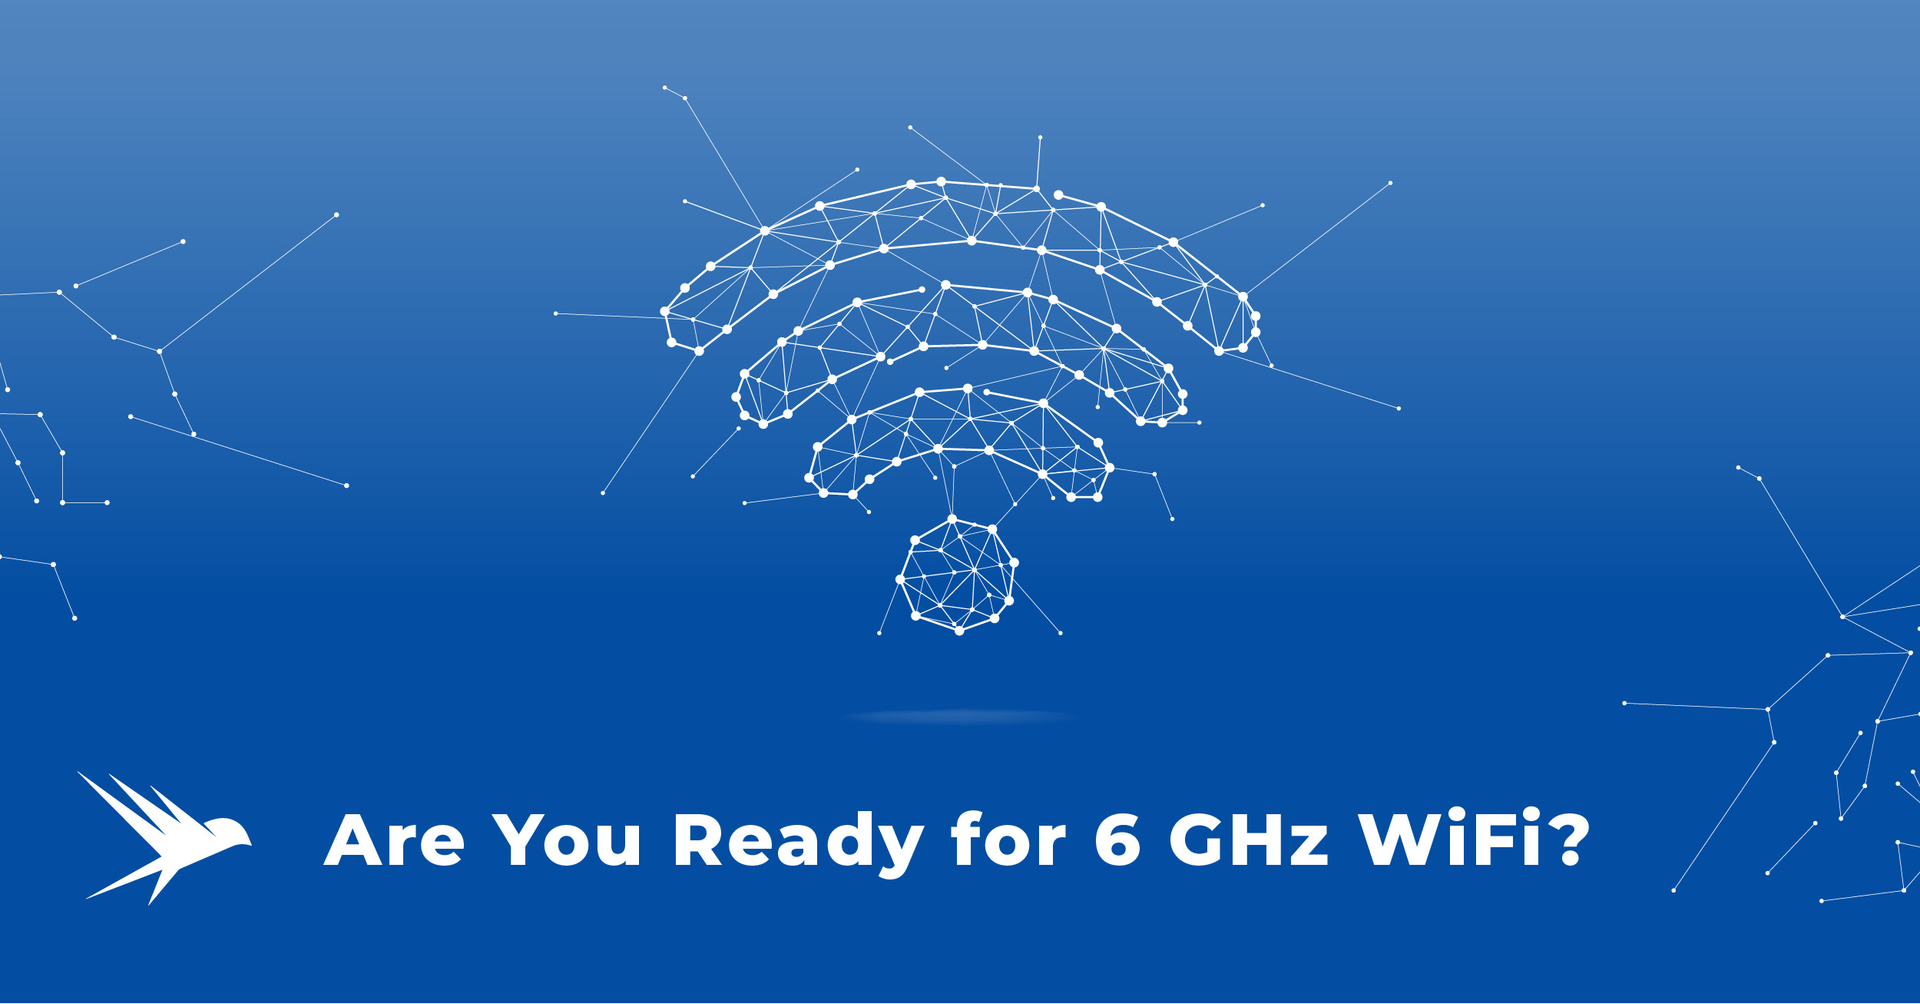 graphic suggesting WiFi networking, with WorldVue bird logo and text saying "Are You Ready for 6 GHz WiFi?"